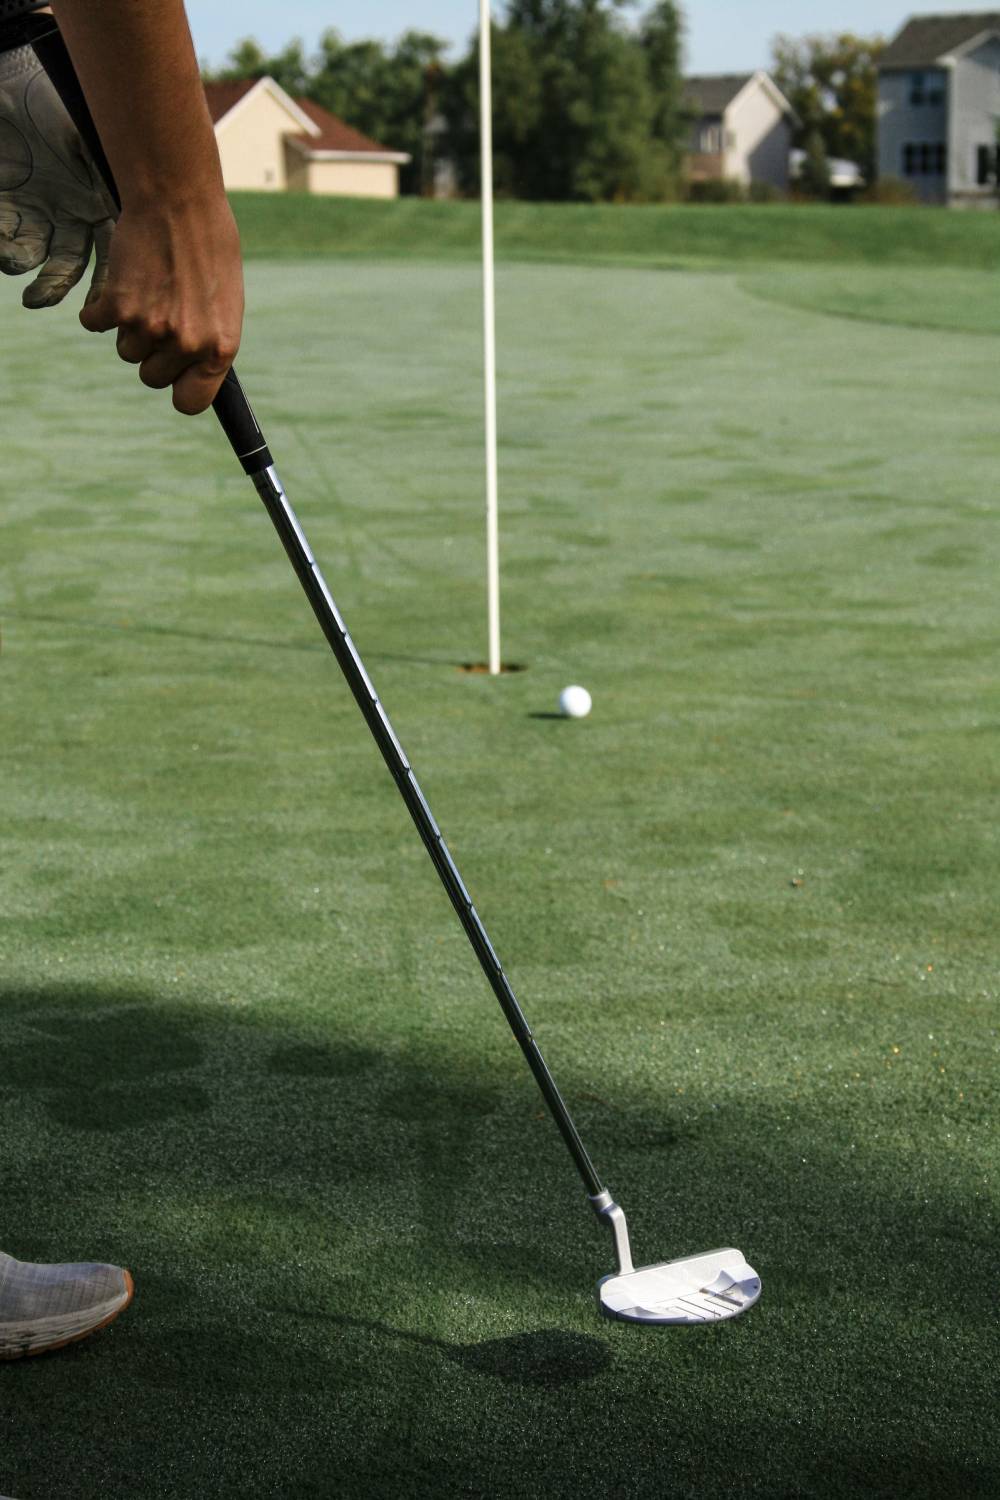 Golfer pushing a putt to the right of the hole